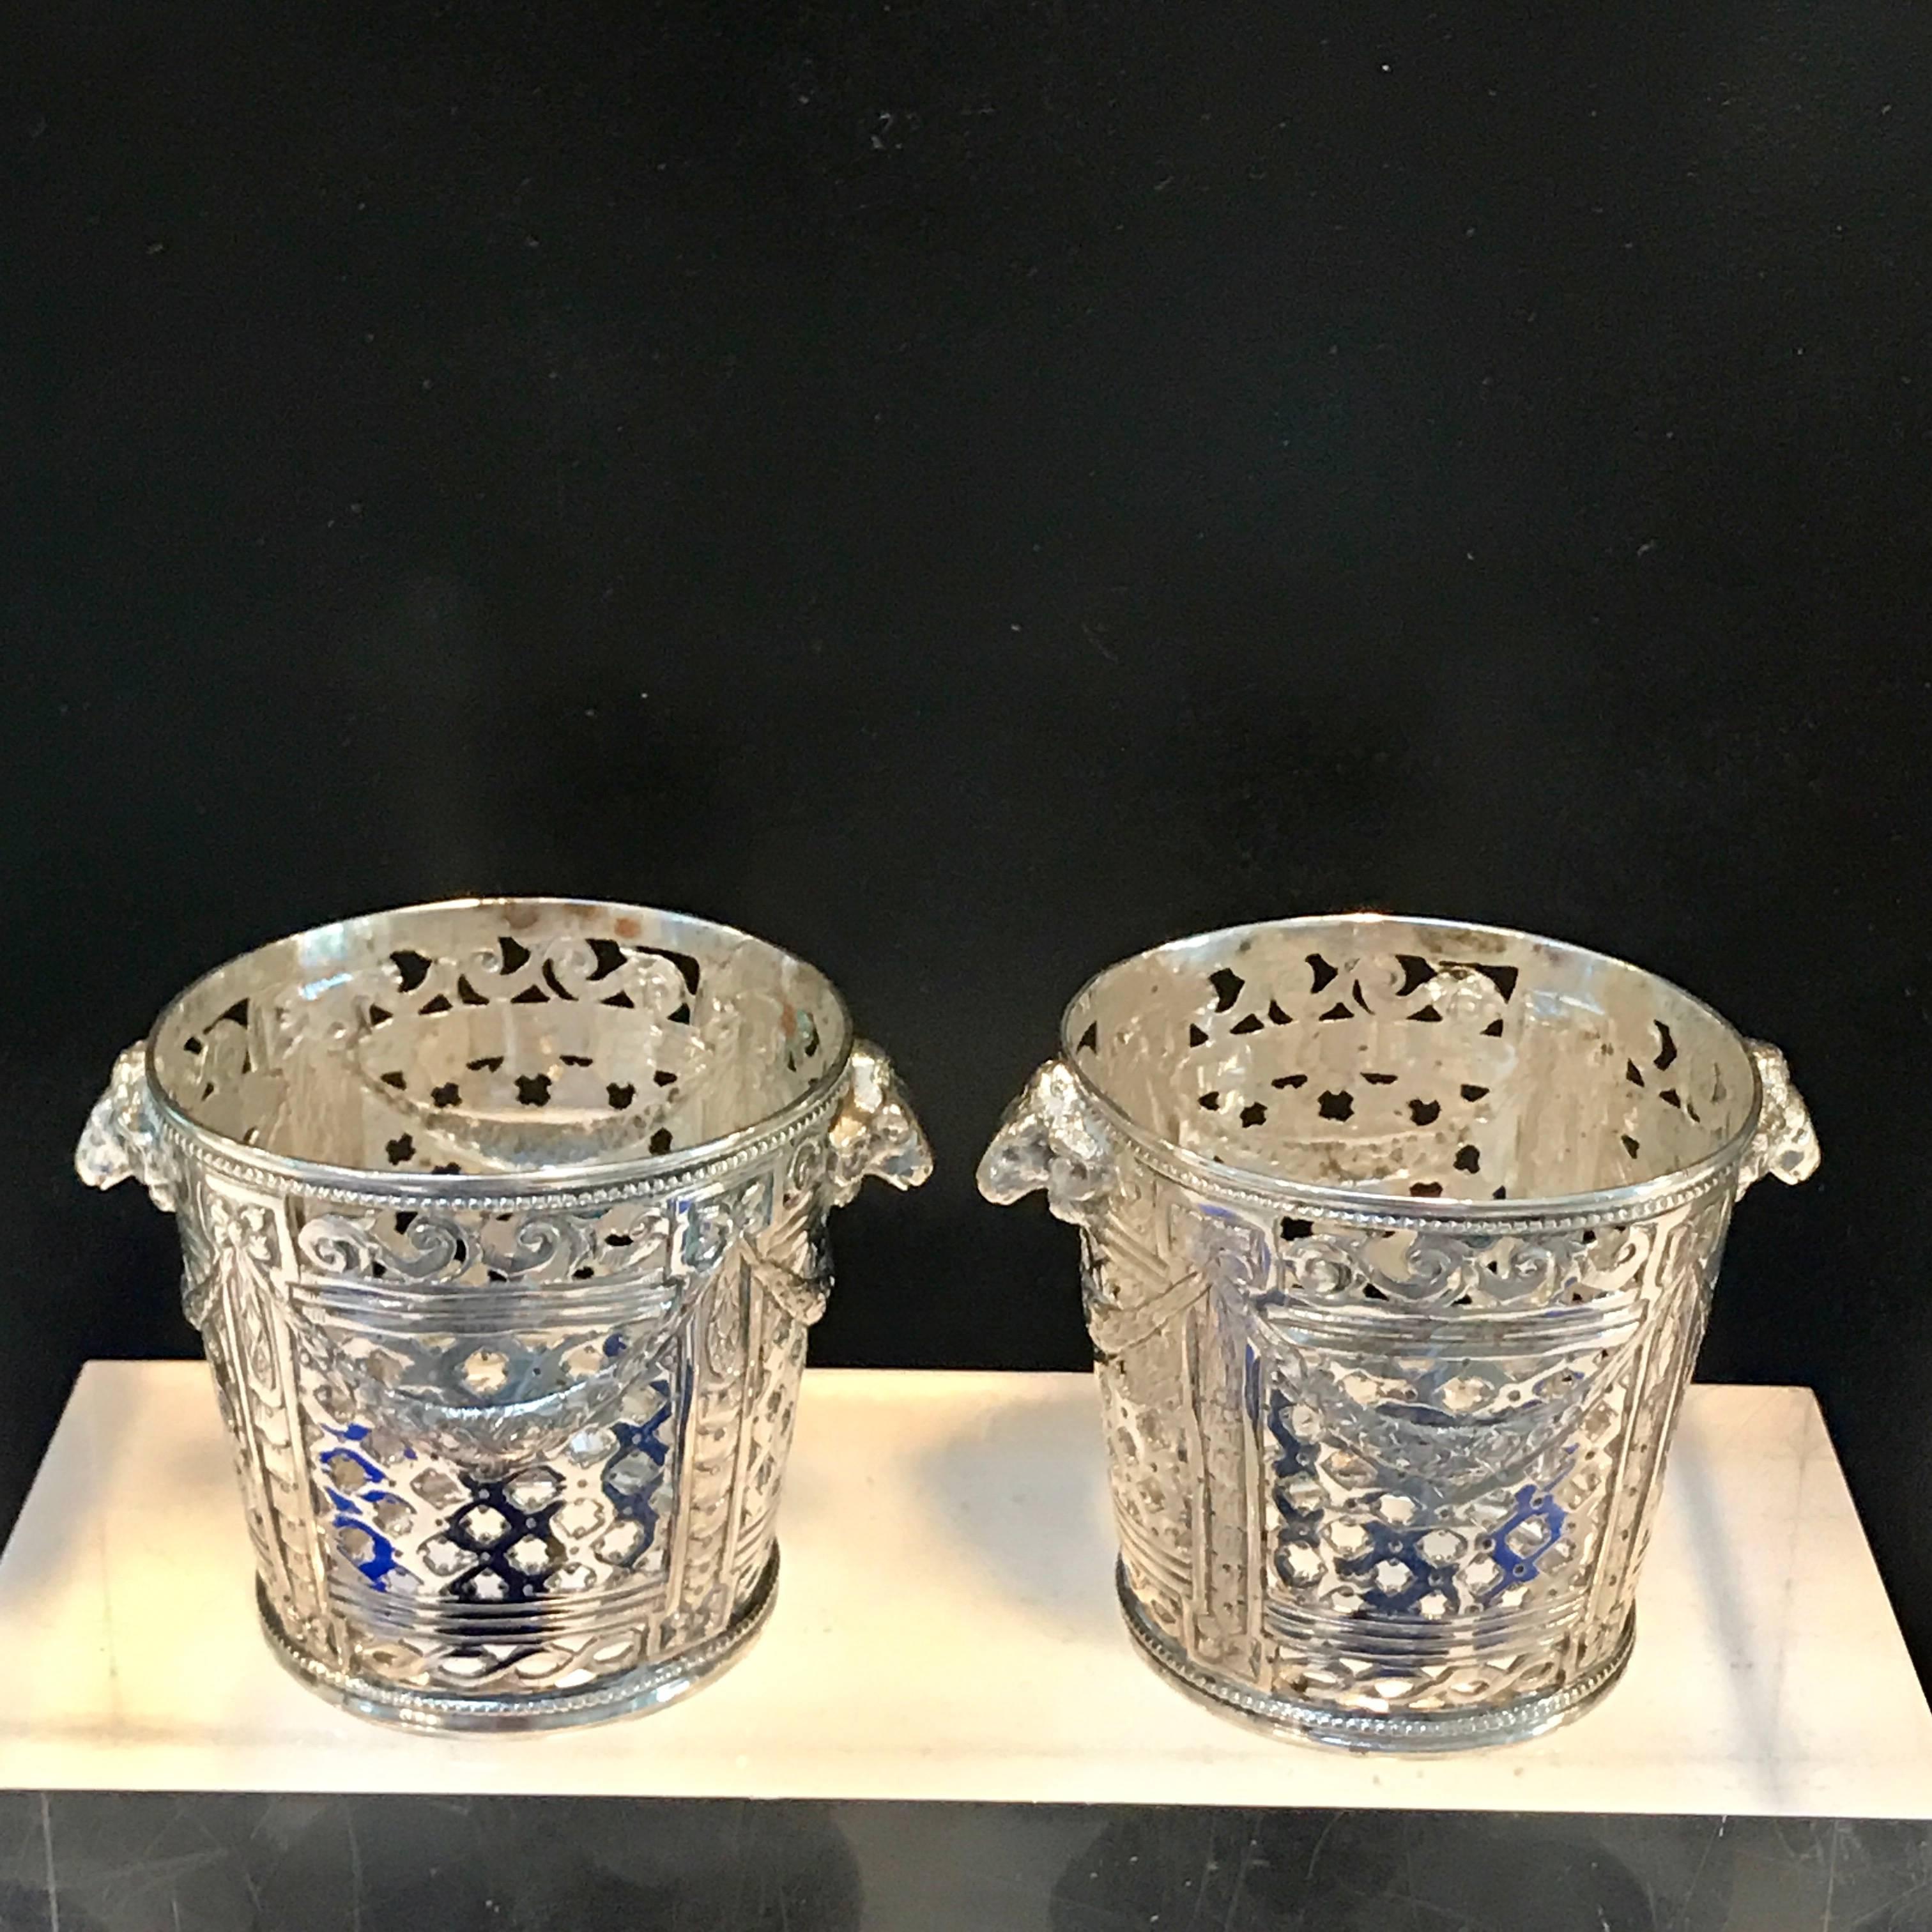 Four Silver Louis XVI Style Cachepots or Salts, with Cobalt Blue Glass Liners 4